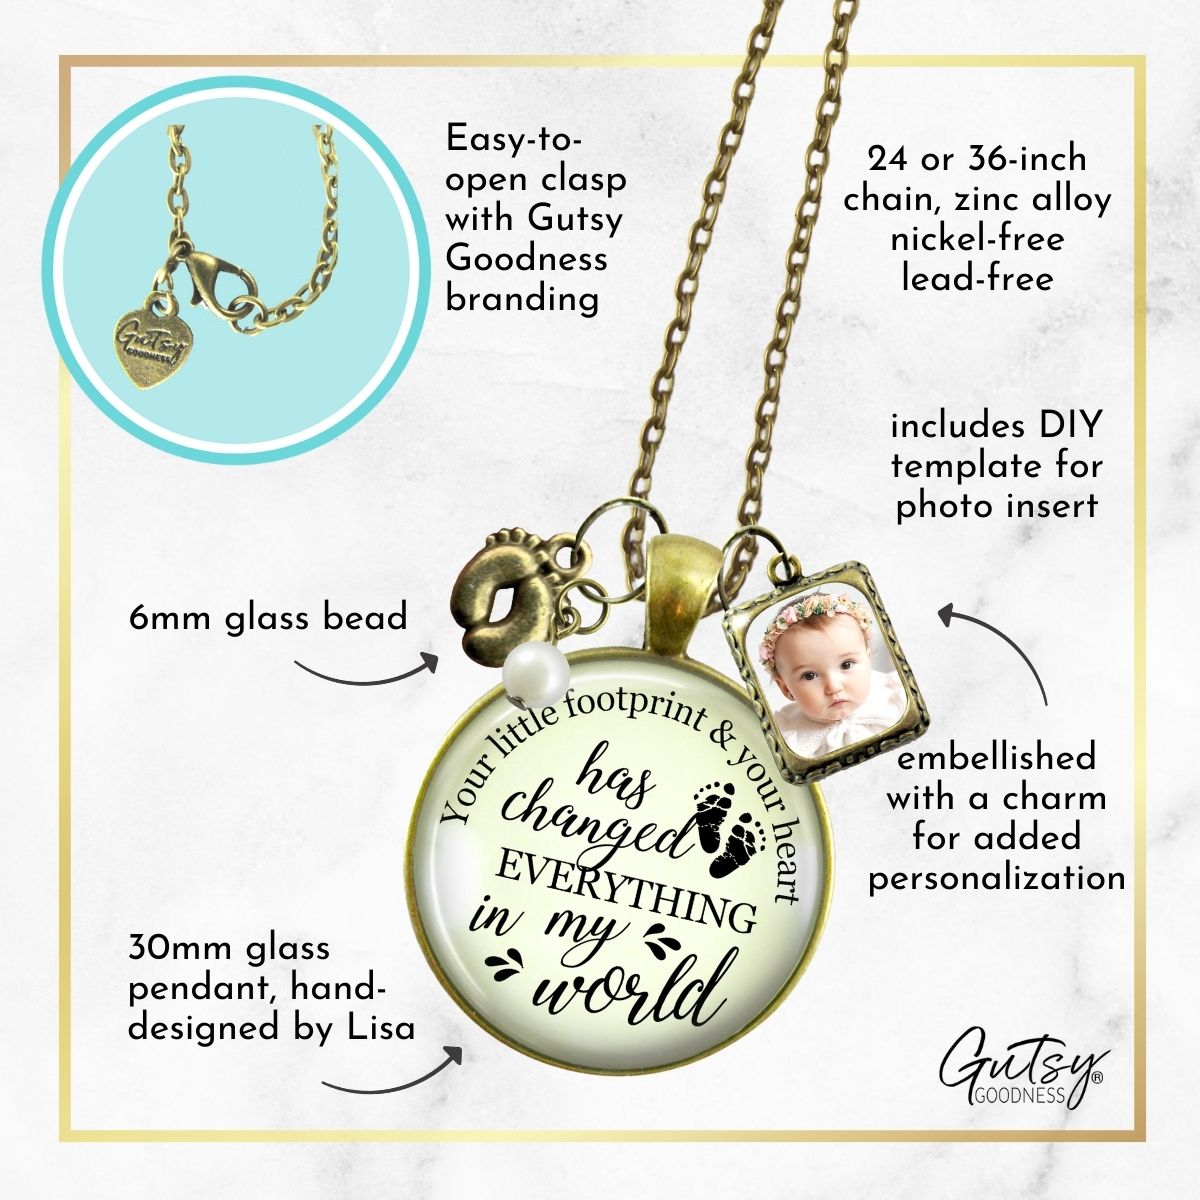 Handmade Gutsy Goodness Jewelry New Mom Necklace Your Little Footprint Gift Baby Feet & Photo Frame Charm, DIY Picture